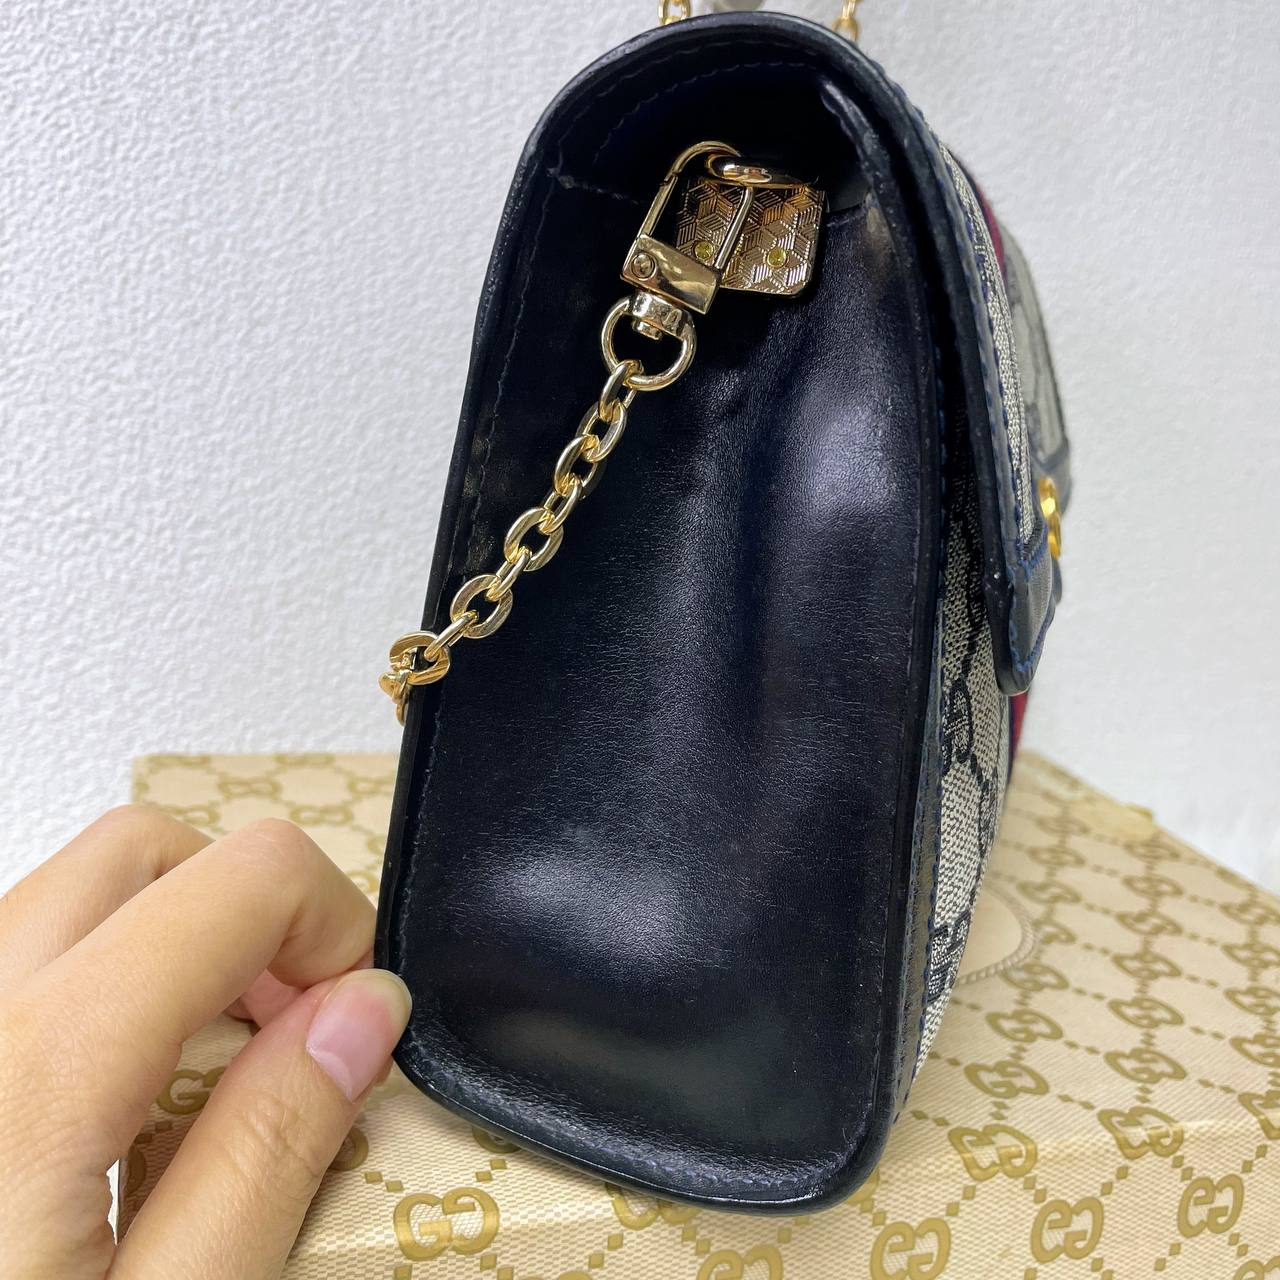 【 In-Stock 】Old Gucci 中古 Sherry Line 手拿包 / 斜揹包